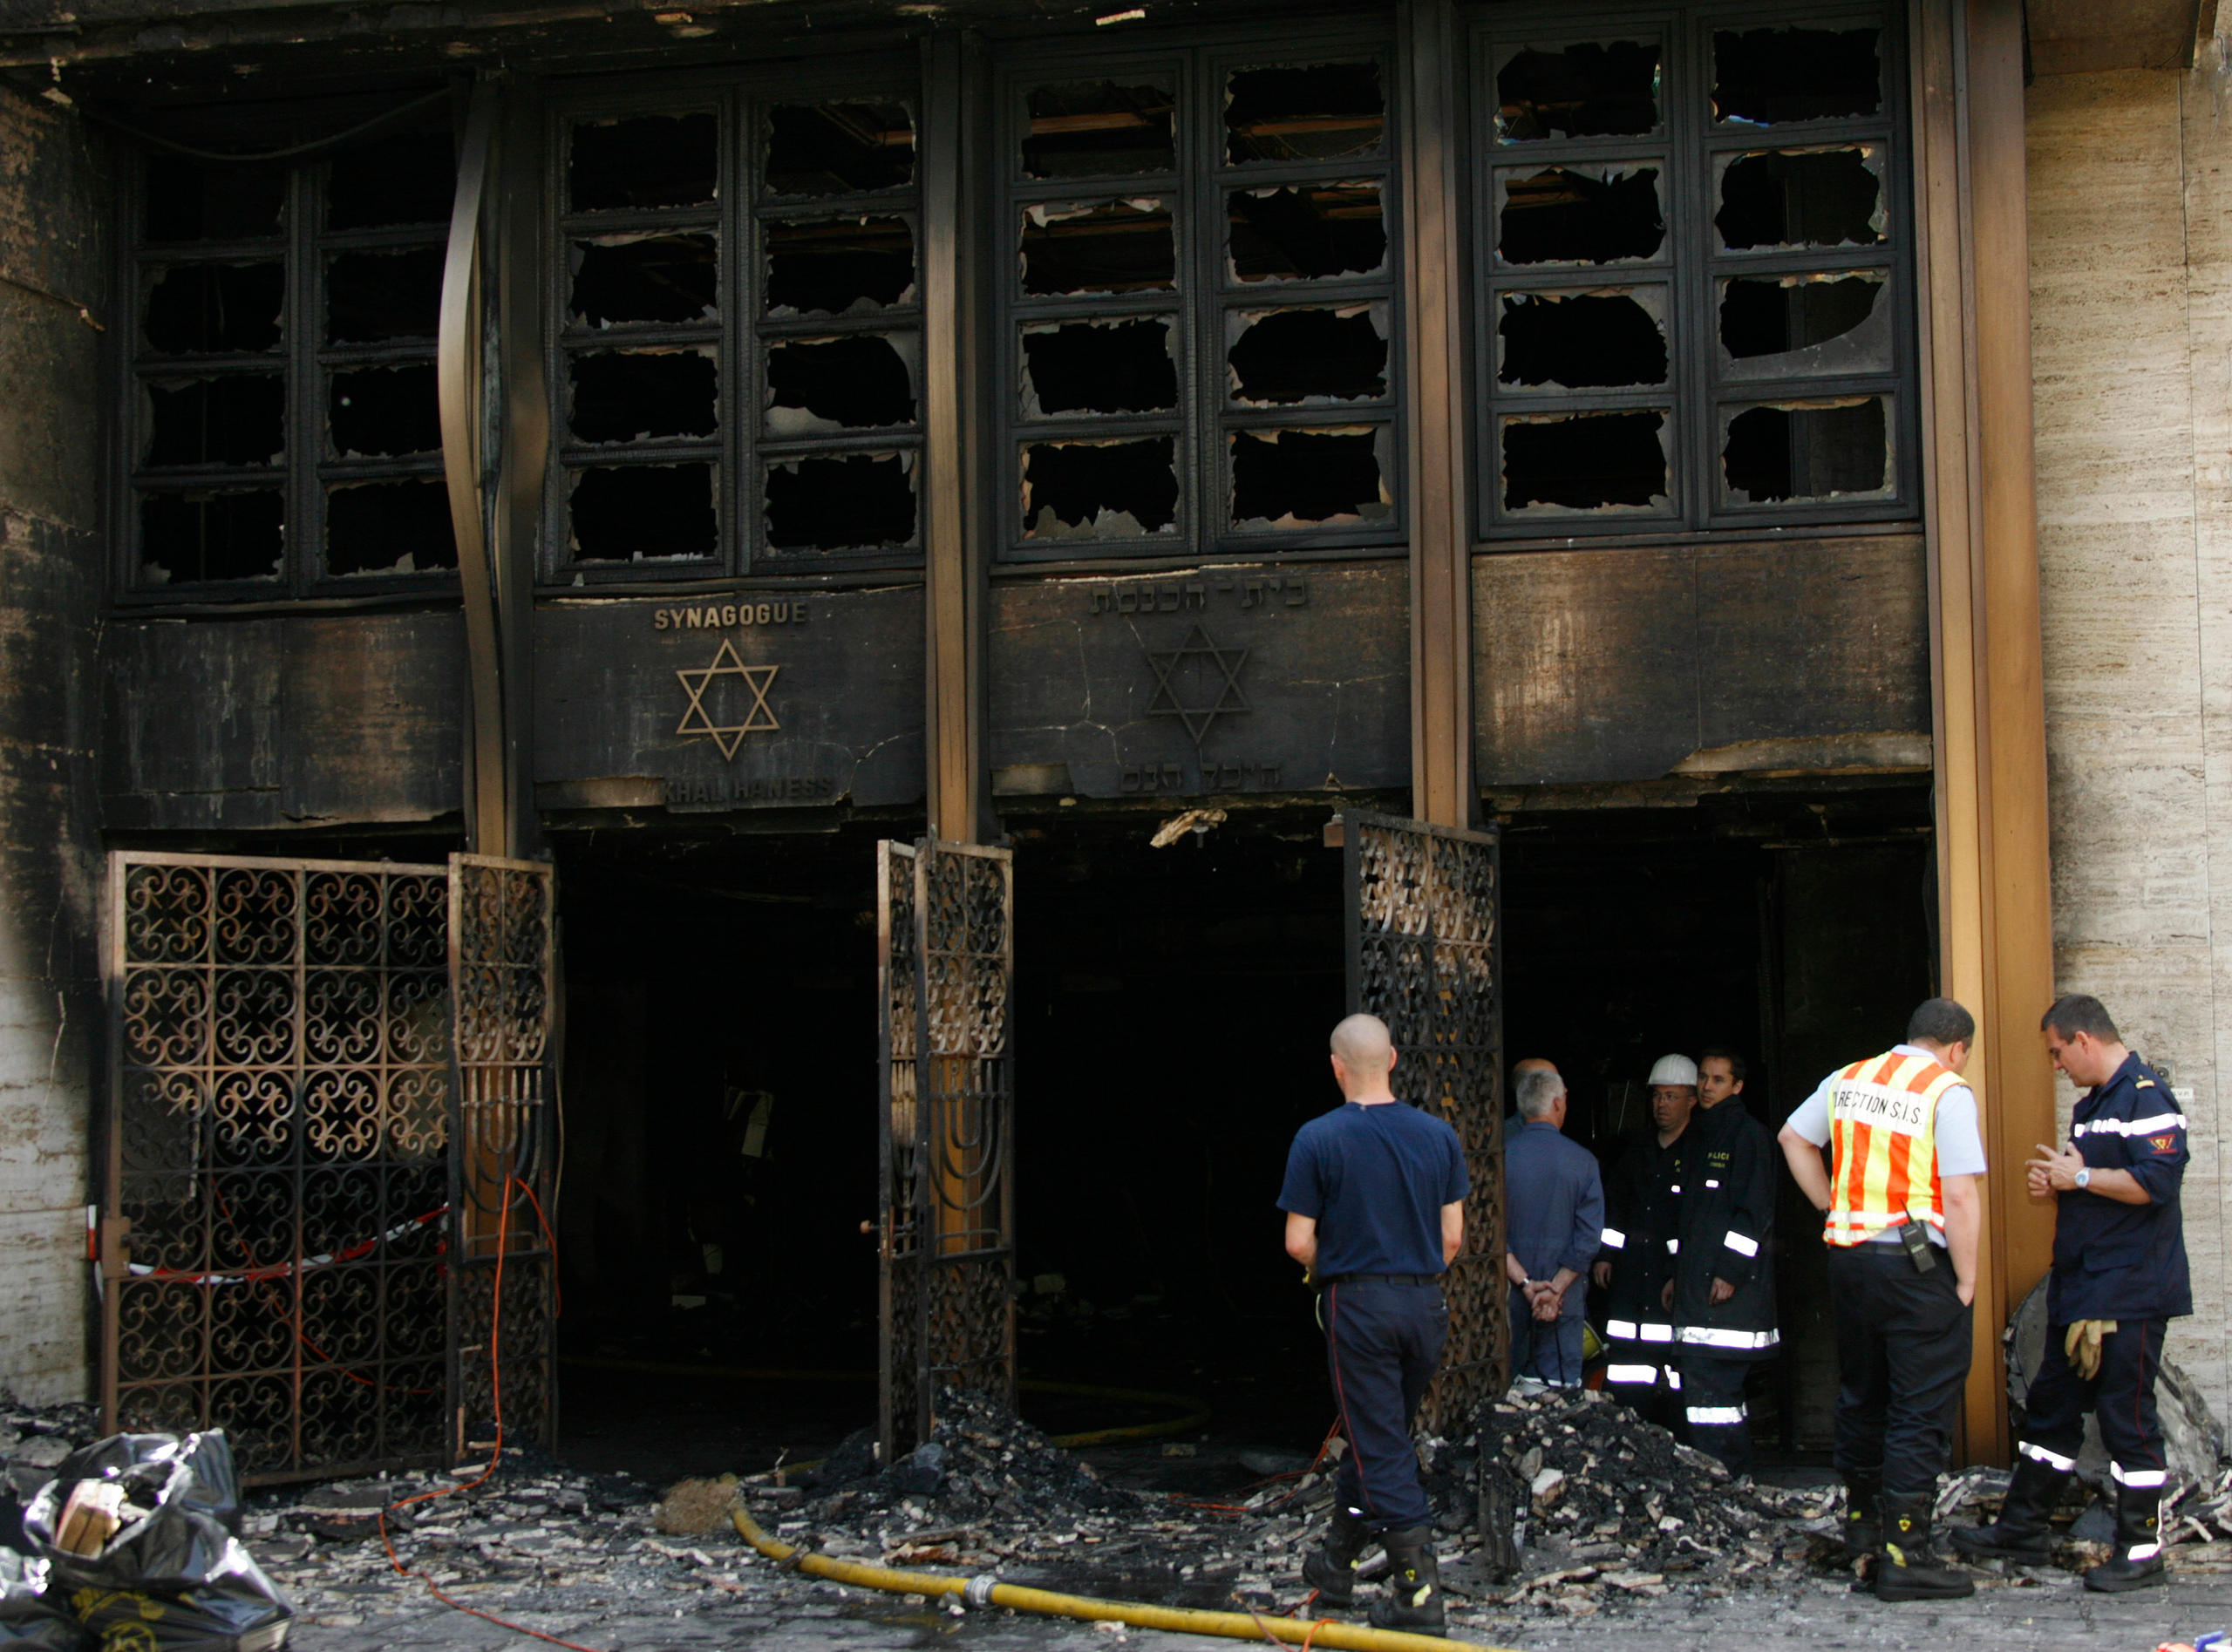 Synagoguefollowing a fire